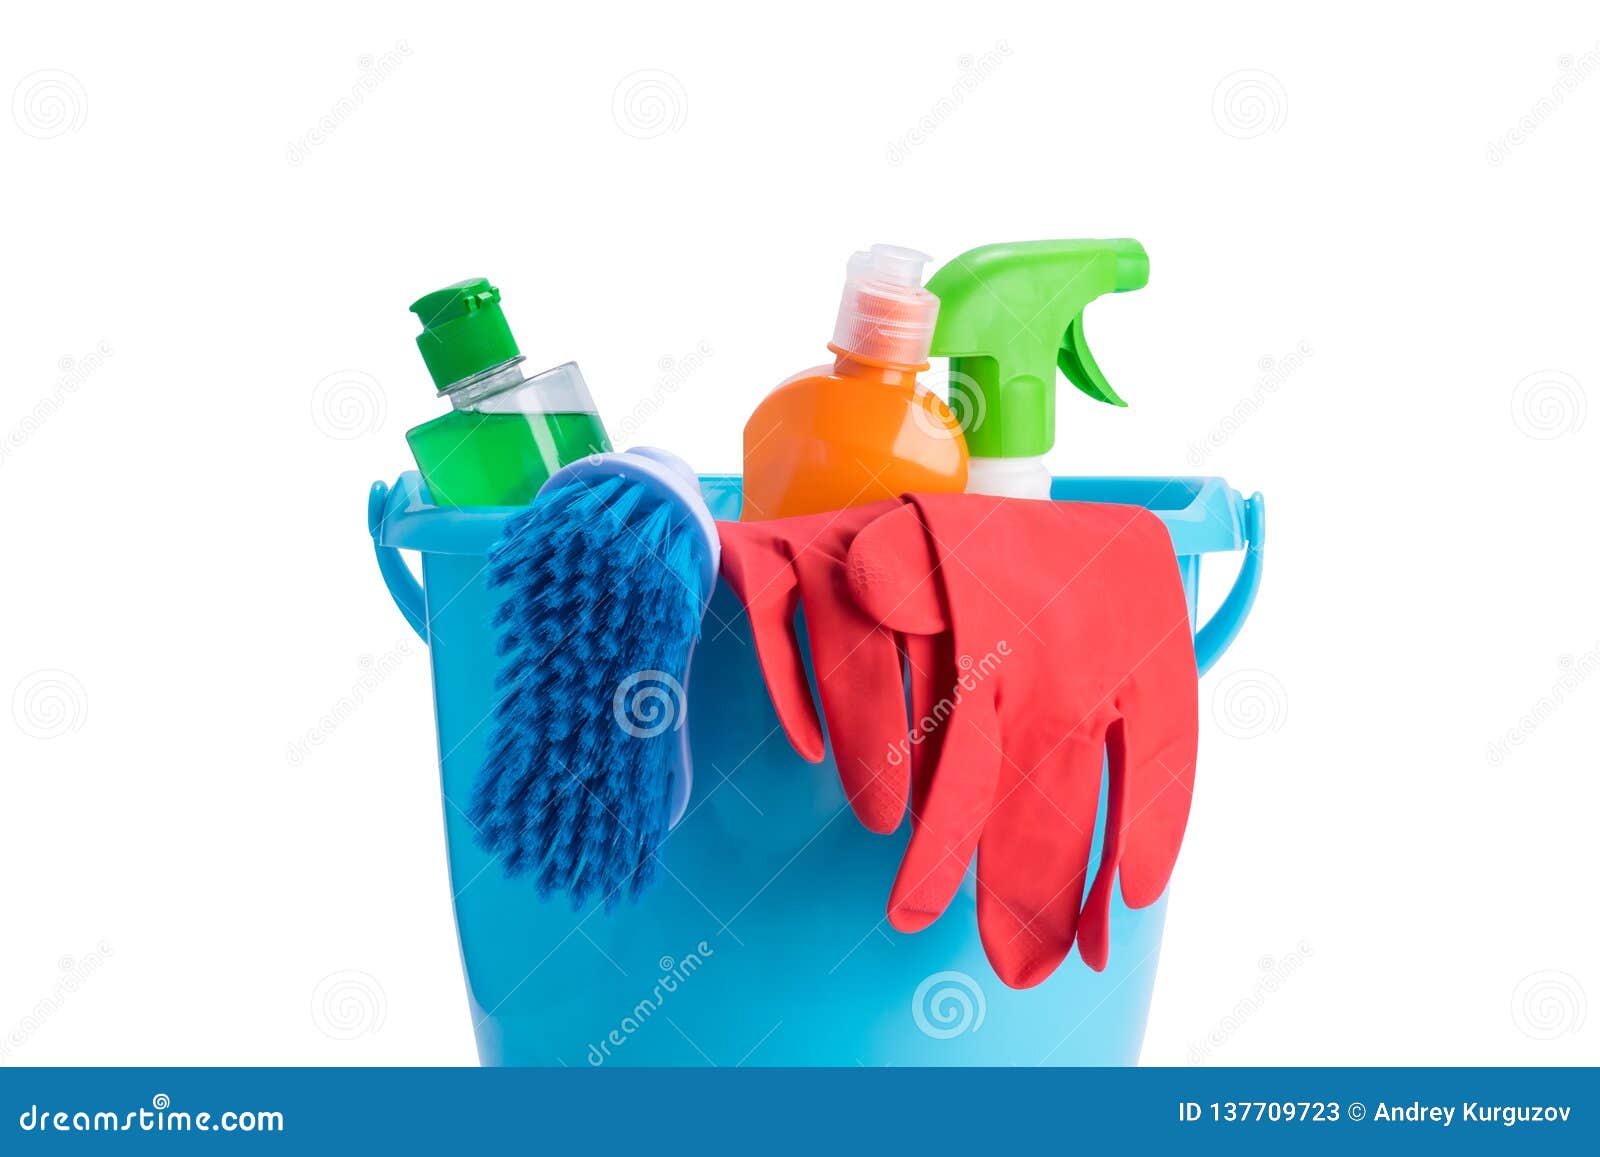 bucket with objects and cleaning products for wet cleaning, on white, closeup